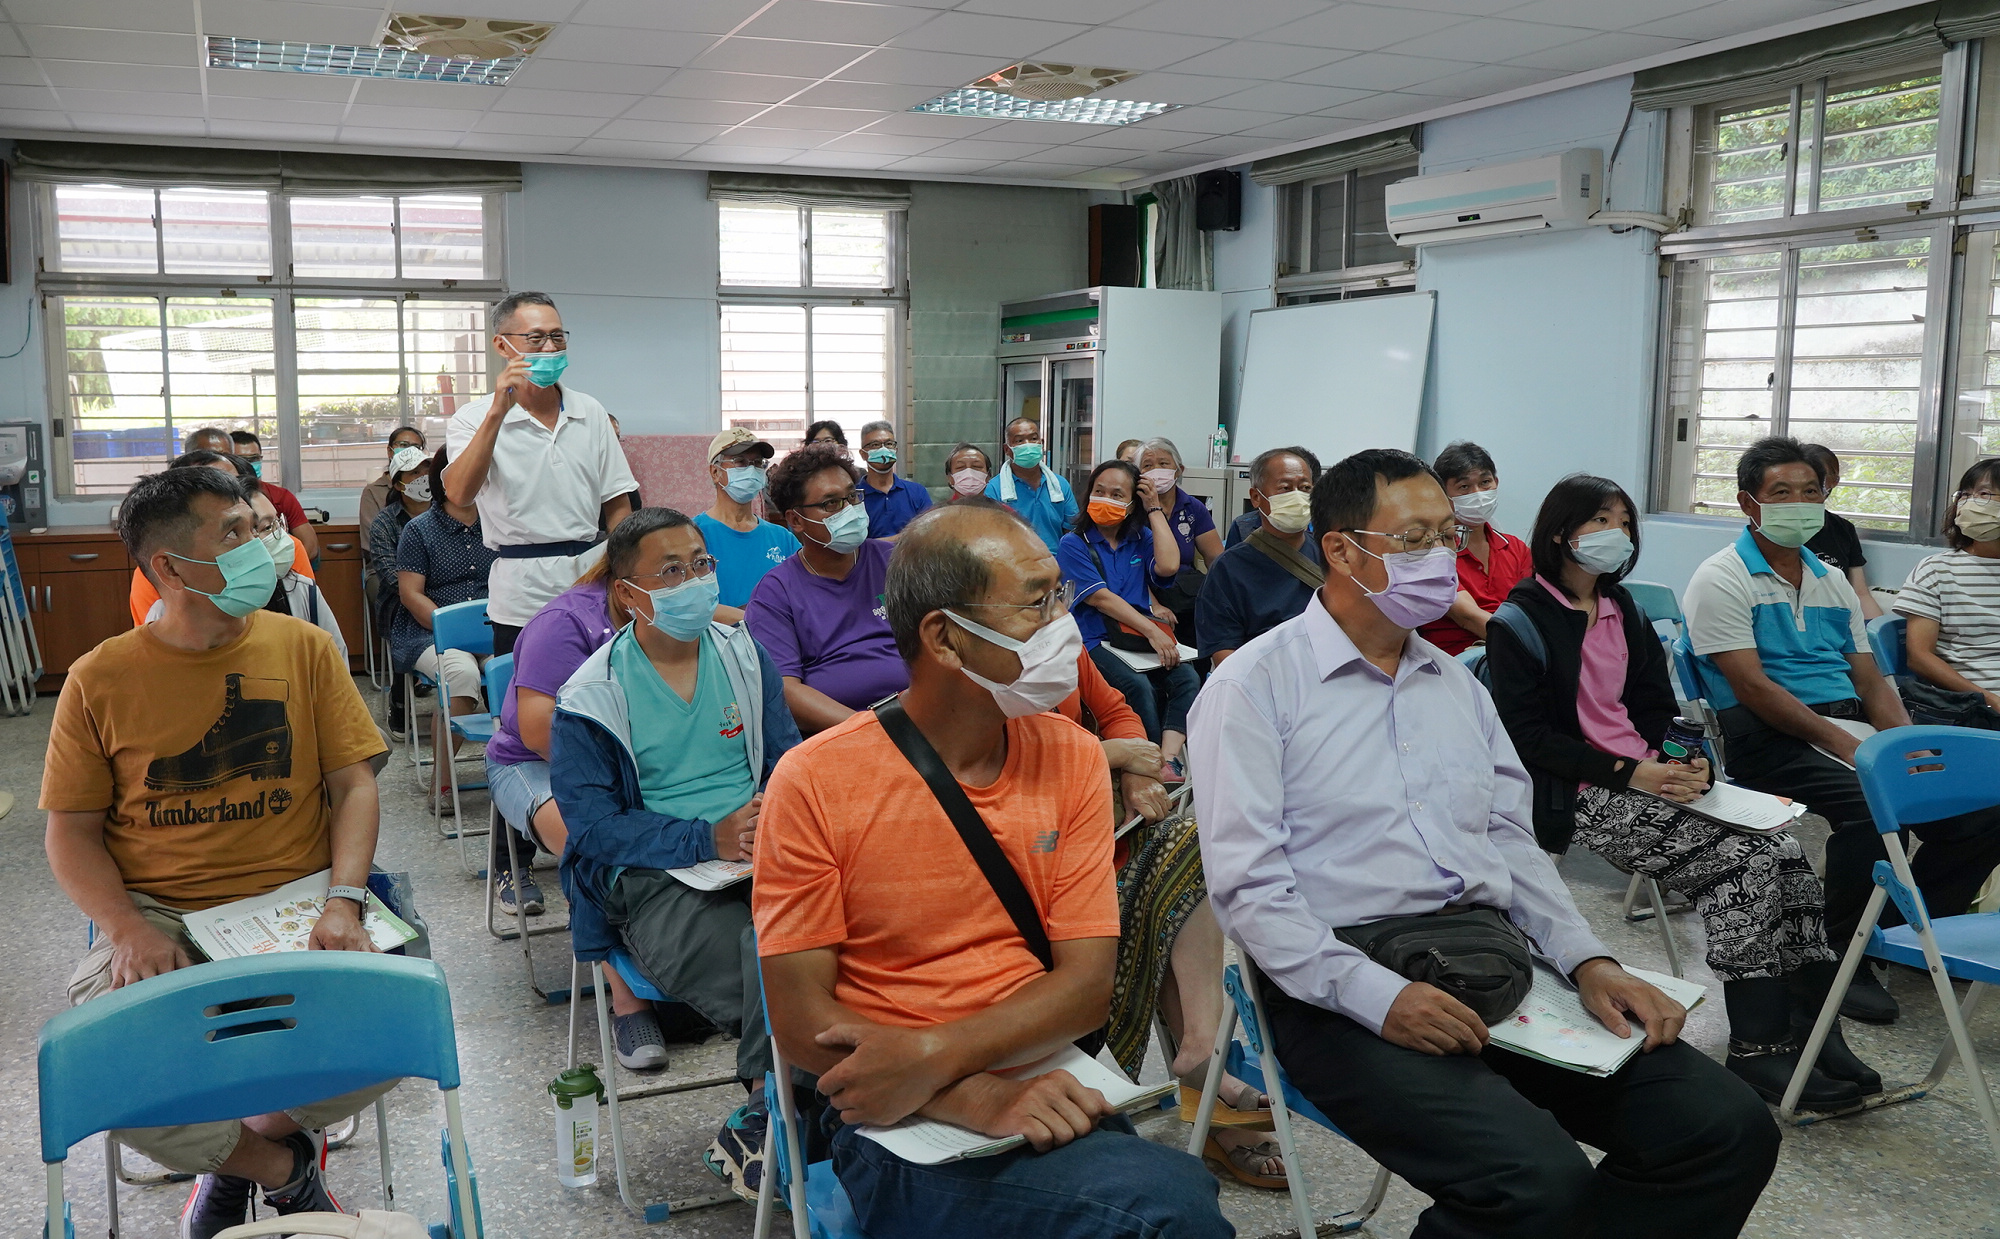 “Lecture on Multi-Application Techniques for Organic Fruit” Held on August 17, 2022, at Banchiu Branch Station